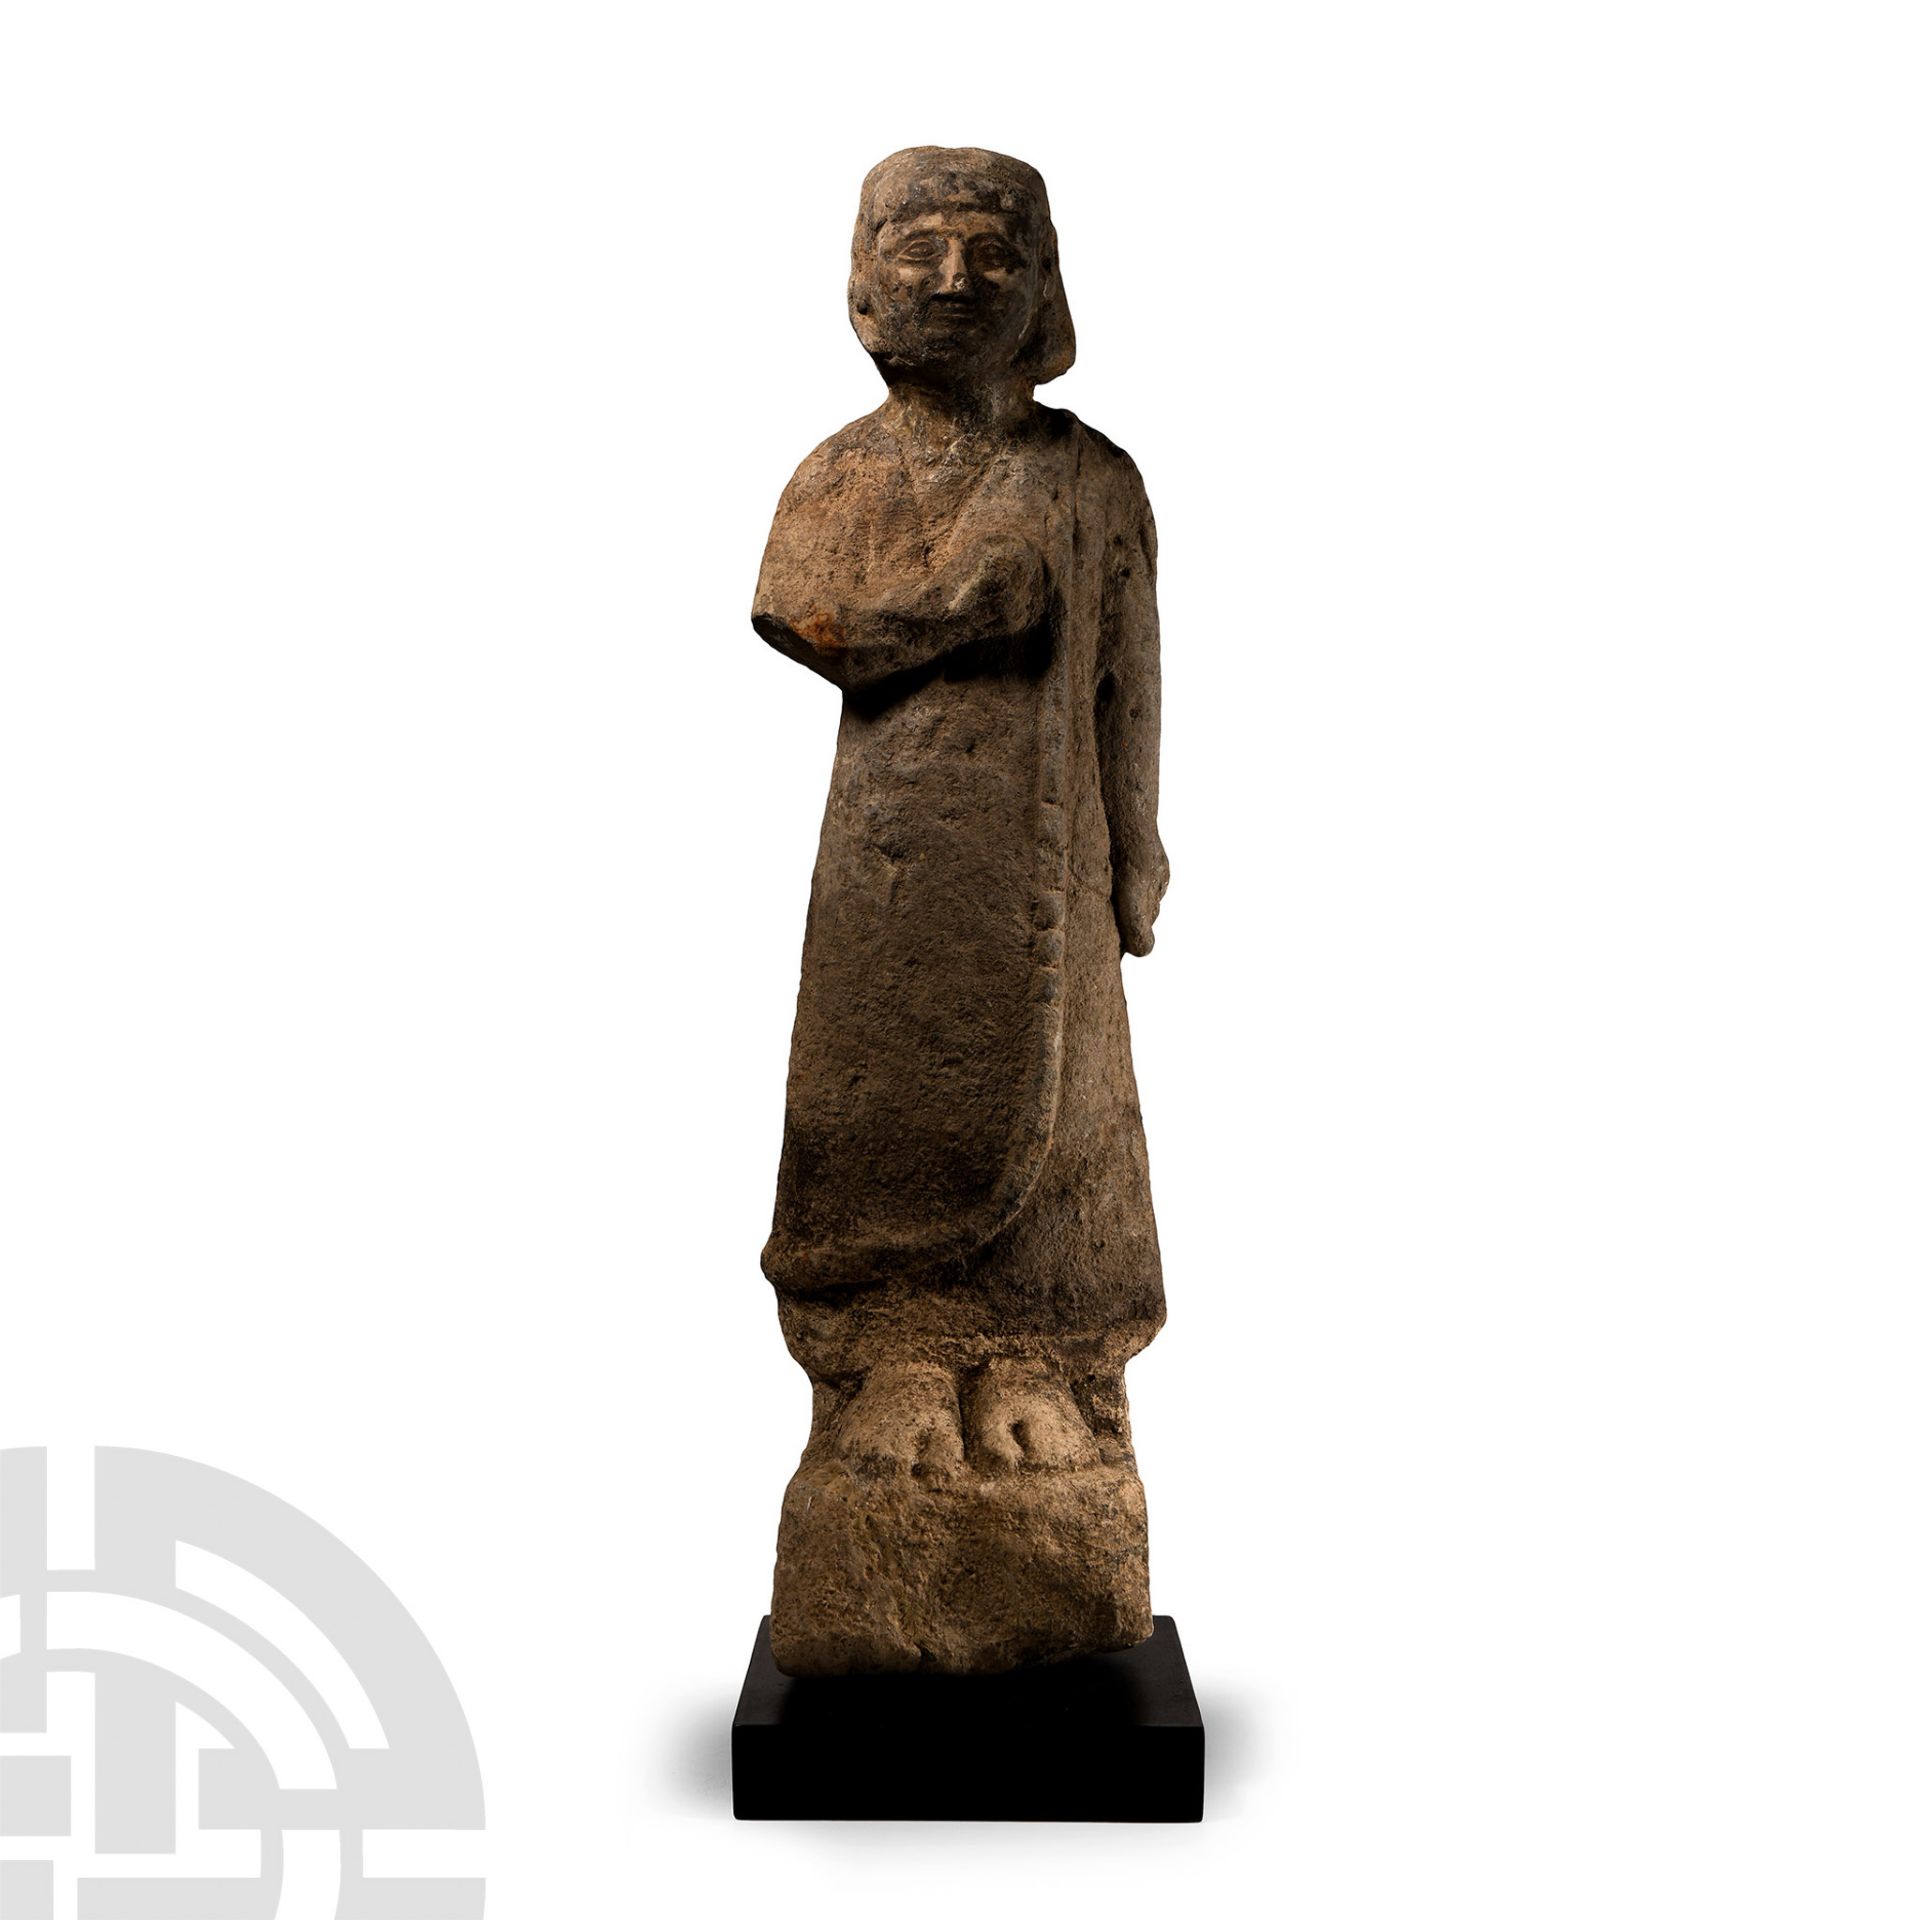 Cypriot Archaic Stone Statue of a Votary - Image 2 of 4